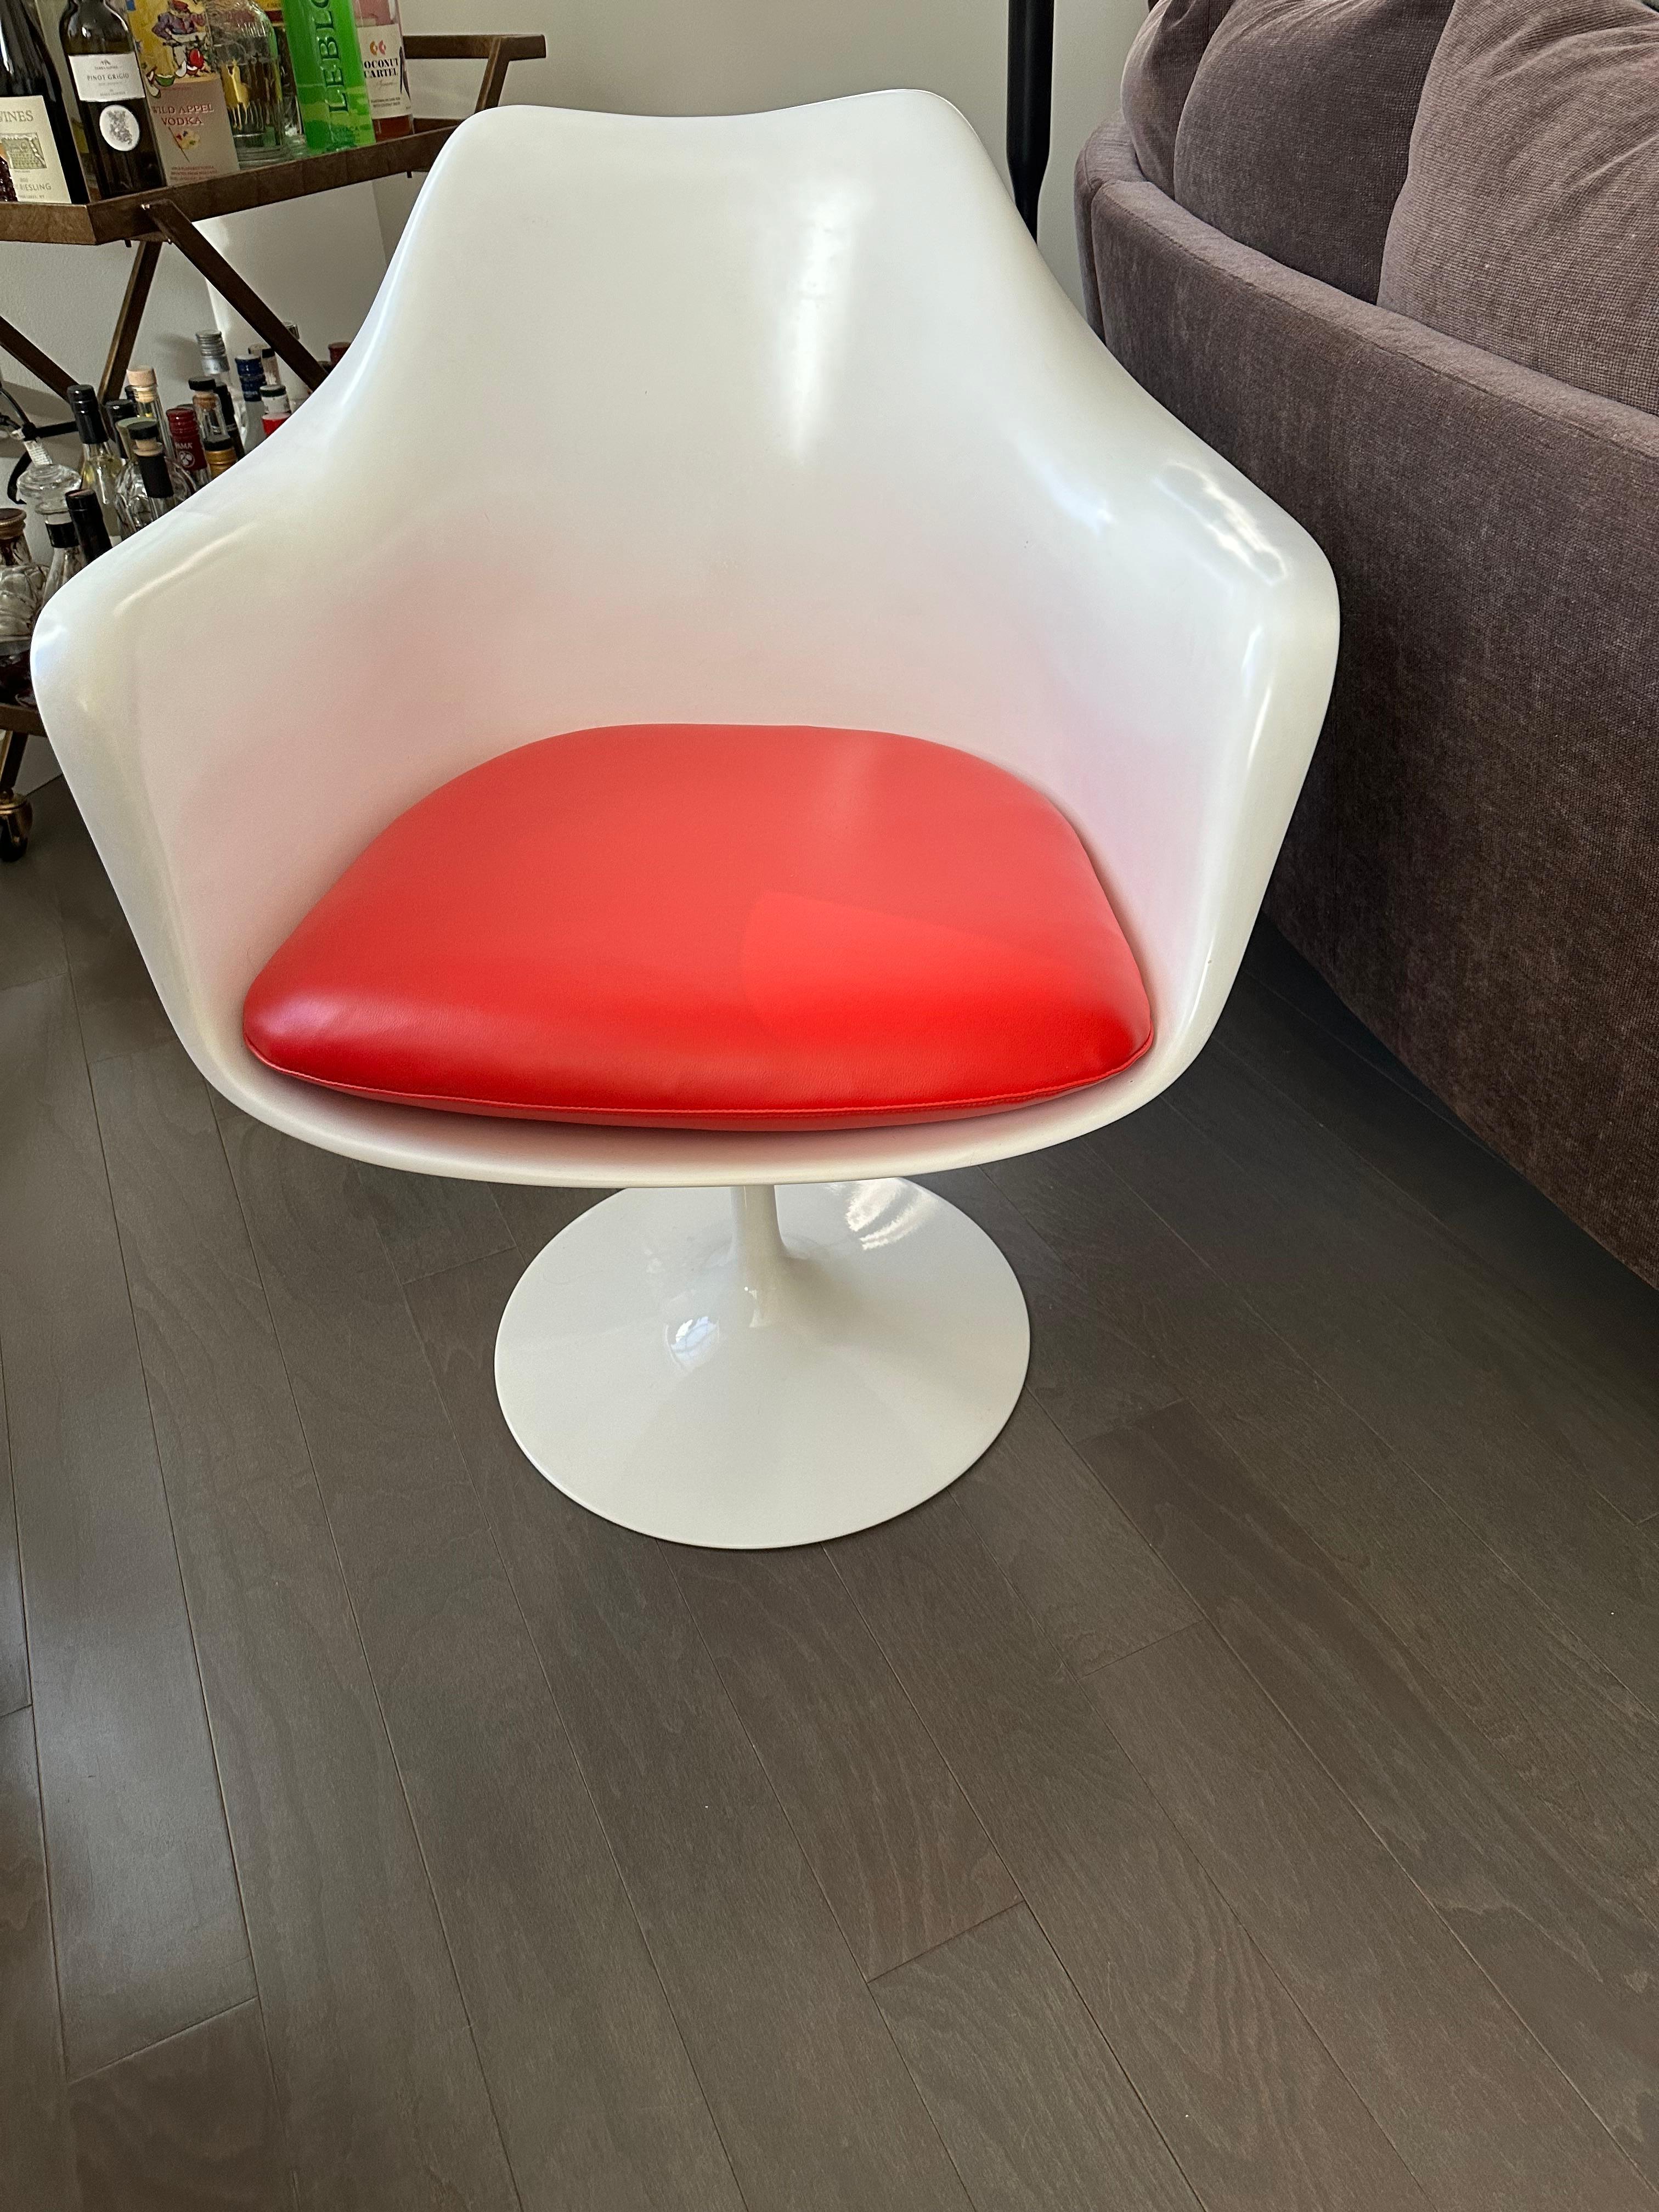 Designed by Saarinen for Knoll ca. 1955. This set is from the early 2000s, in incredible condition and includes iconic red vinyl cushions on its four swivel chairs - two with arms, two without. Table measures 42” by 28” and chairs 20” and 26